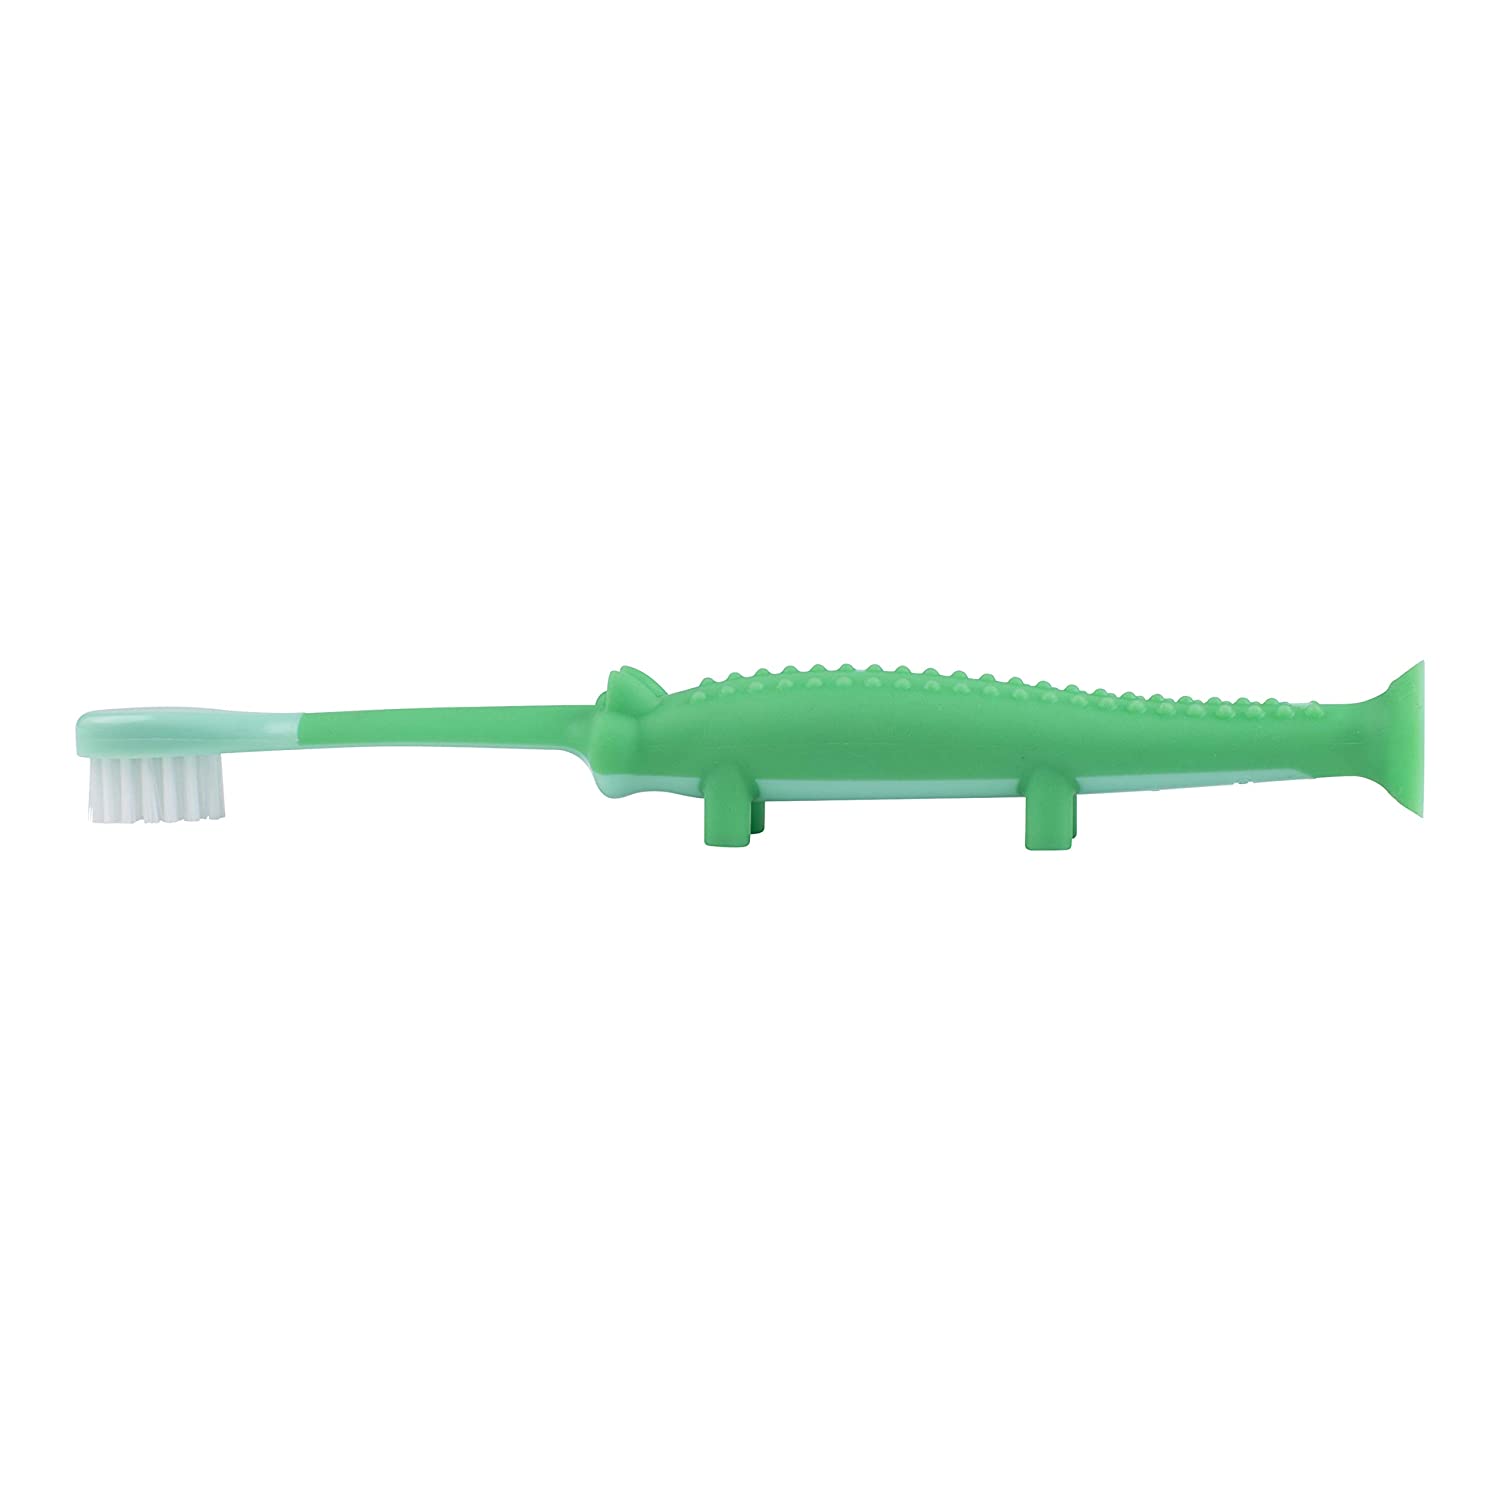 Dr. Brown's Infant-to-Toddler Toothbrush - Green Crocodile